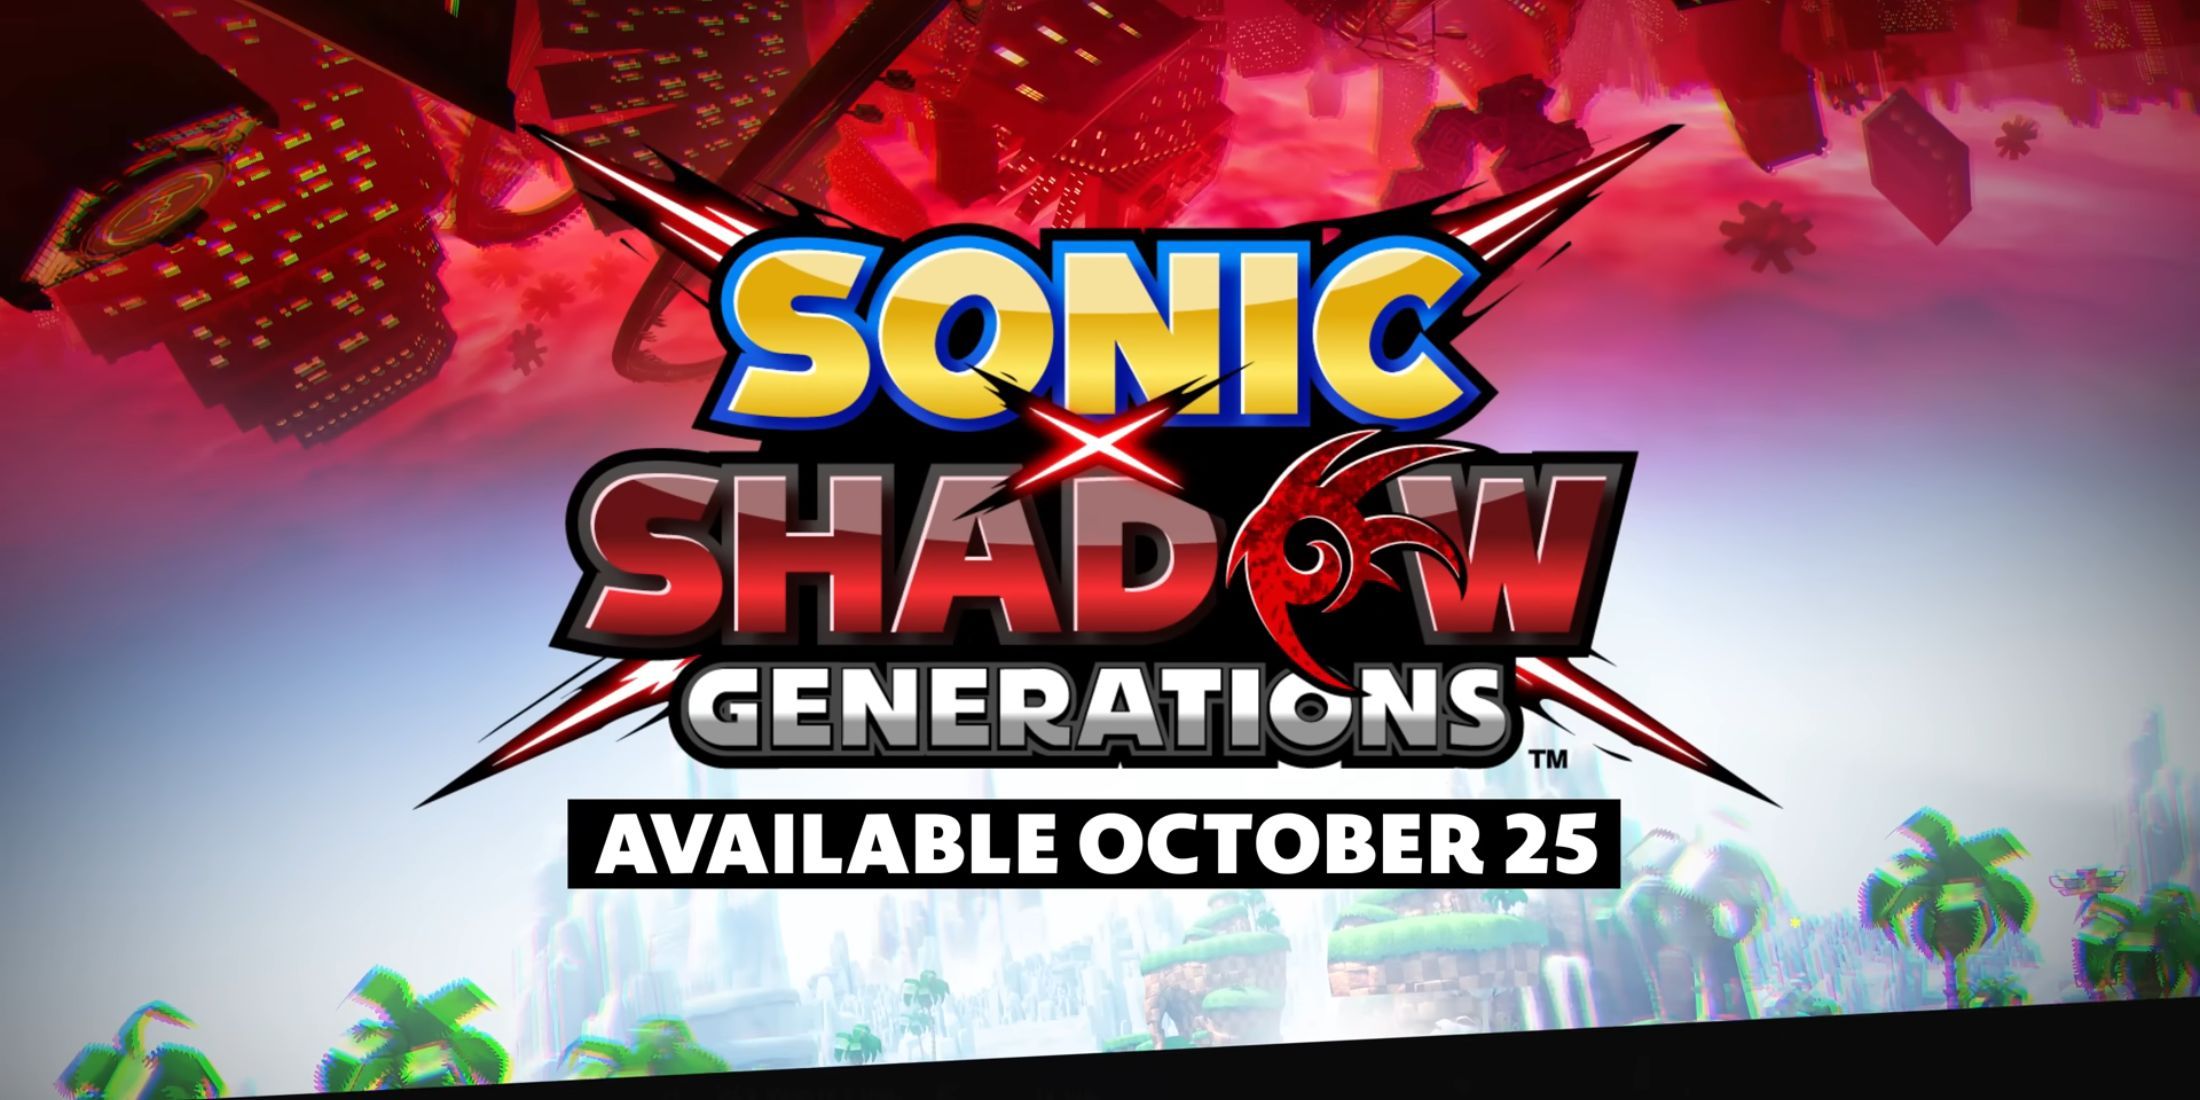 The cover art for Sonic x Shadow Generations